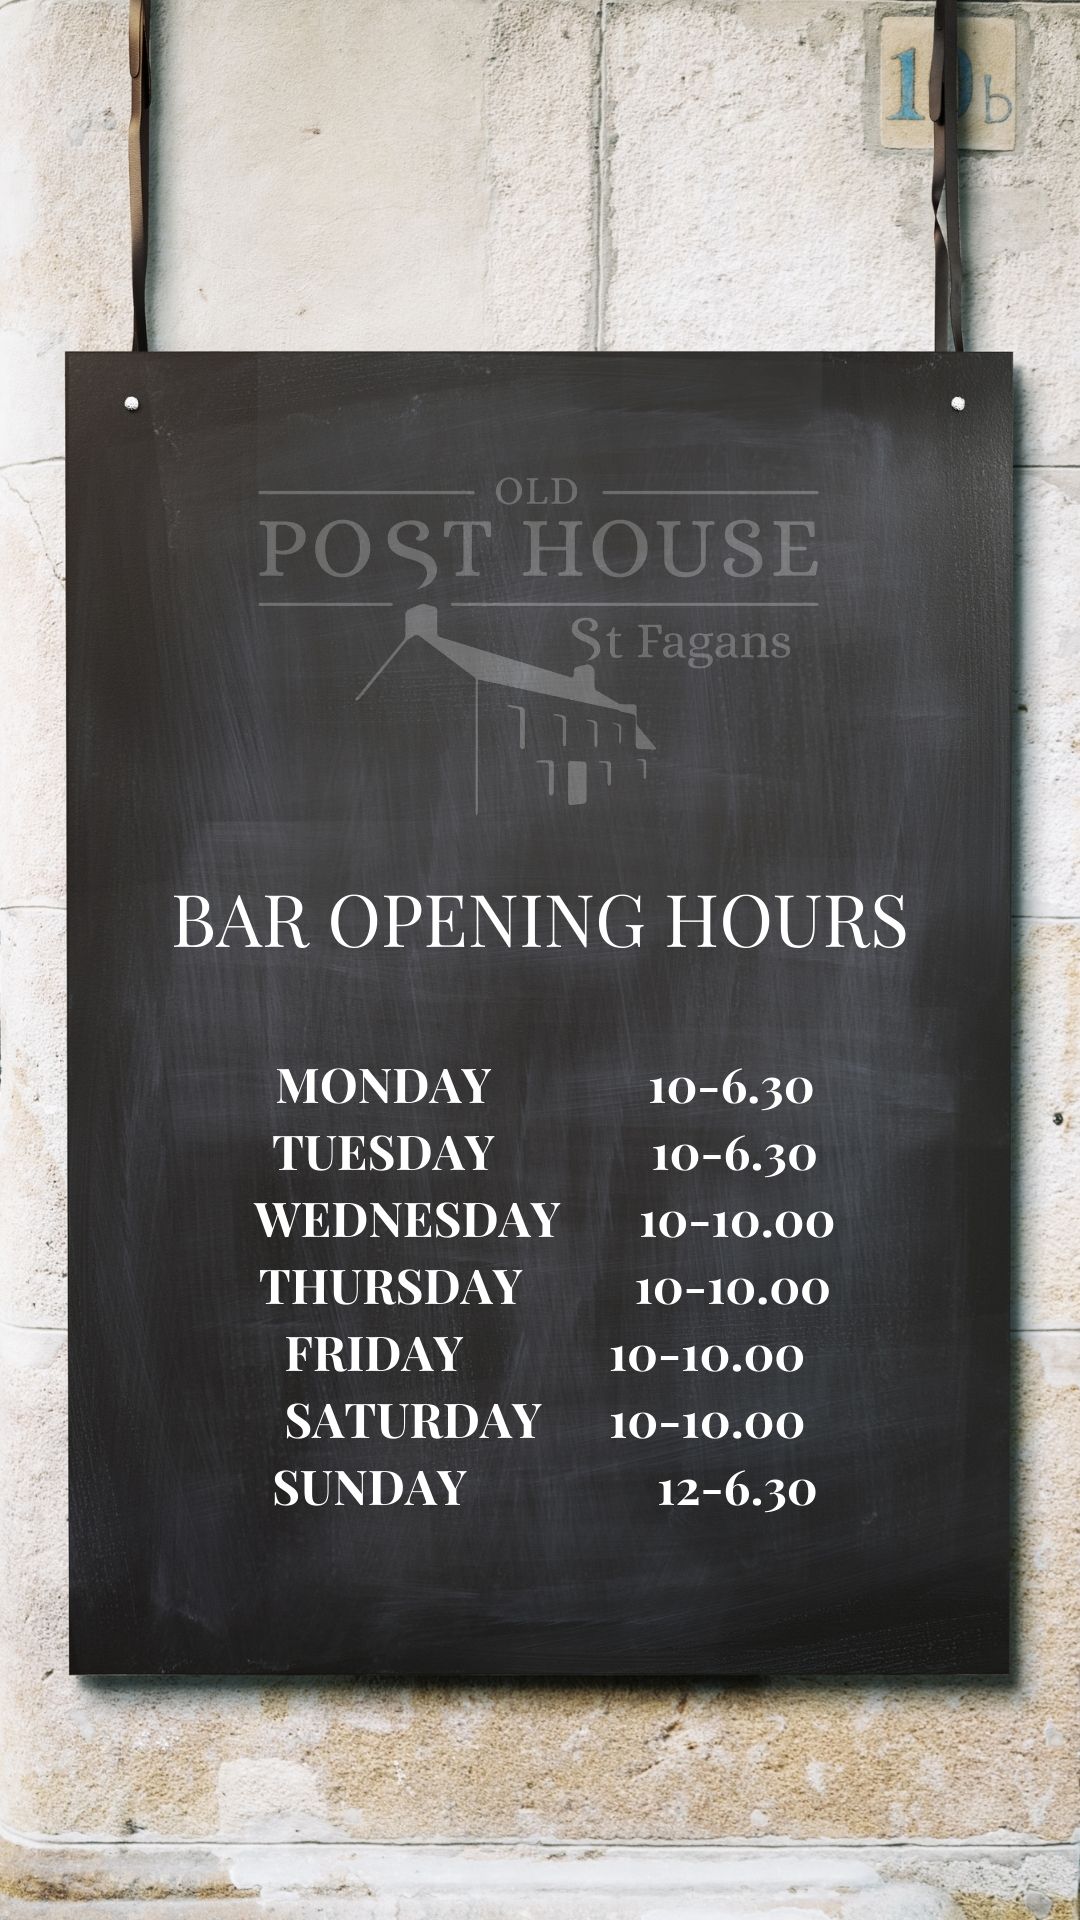 Bar opening hours